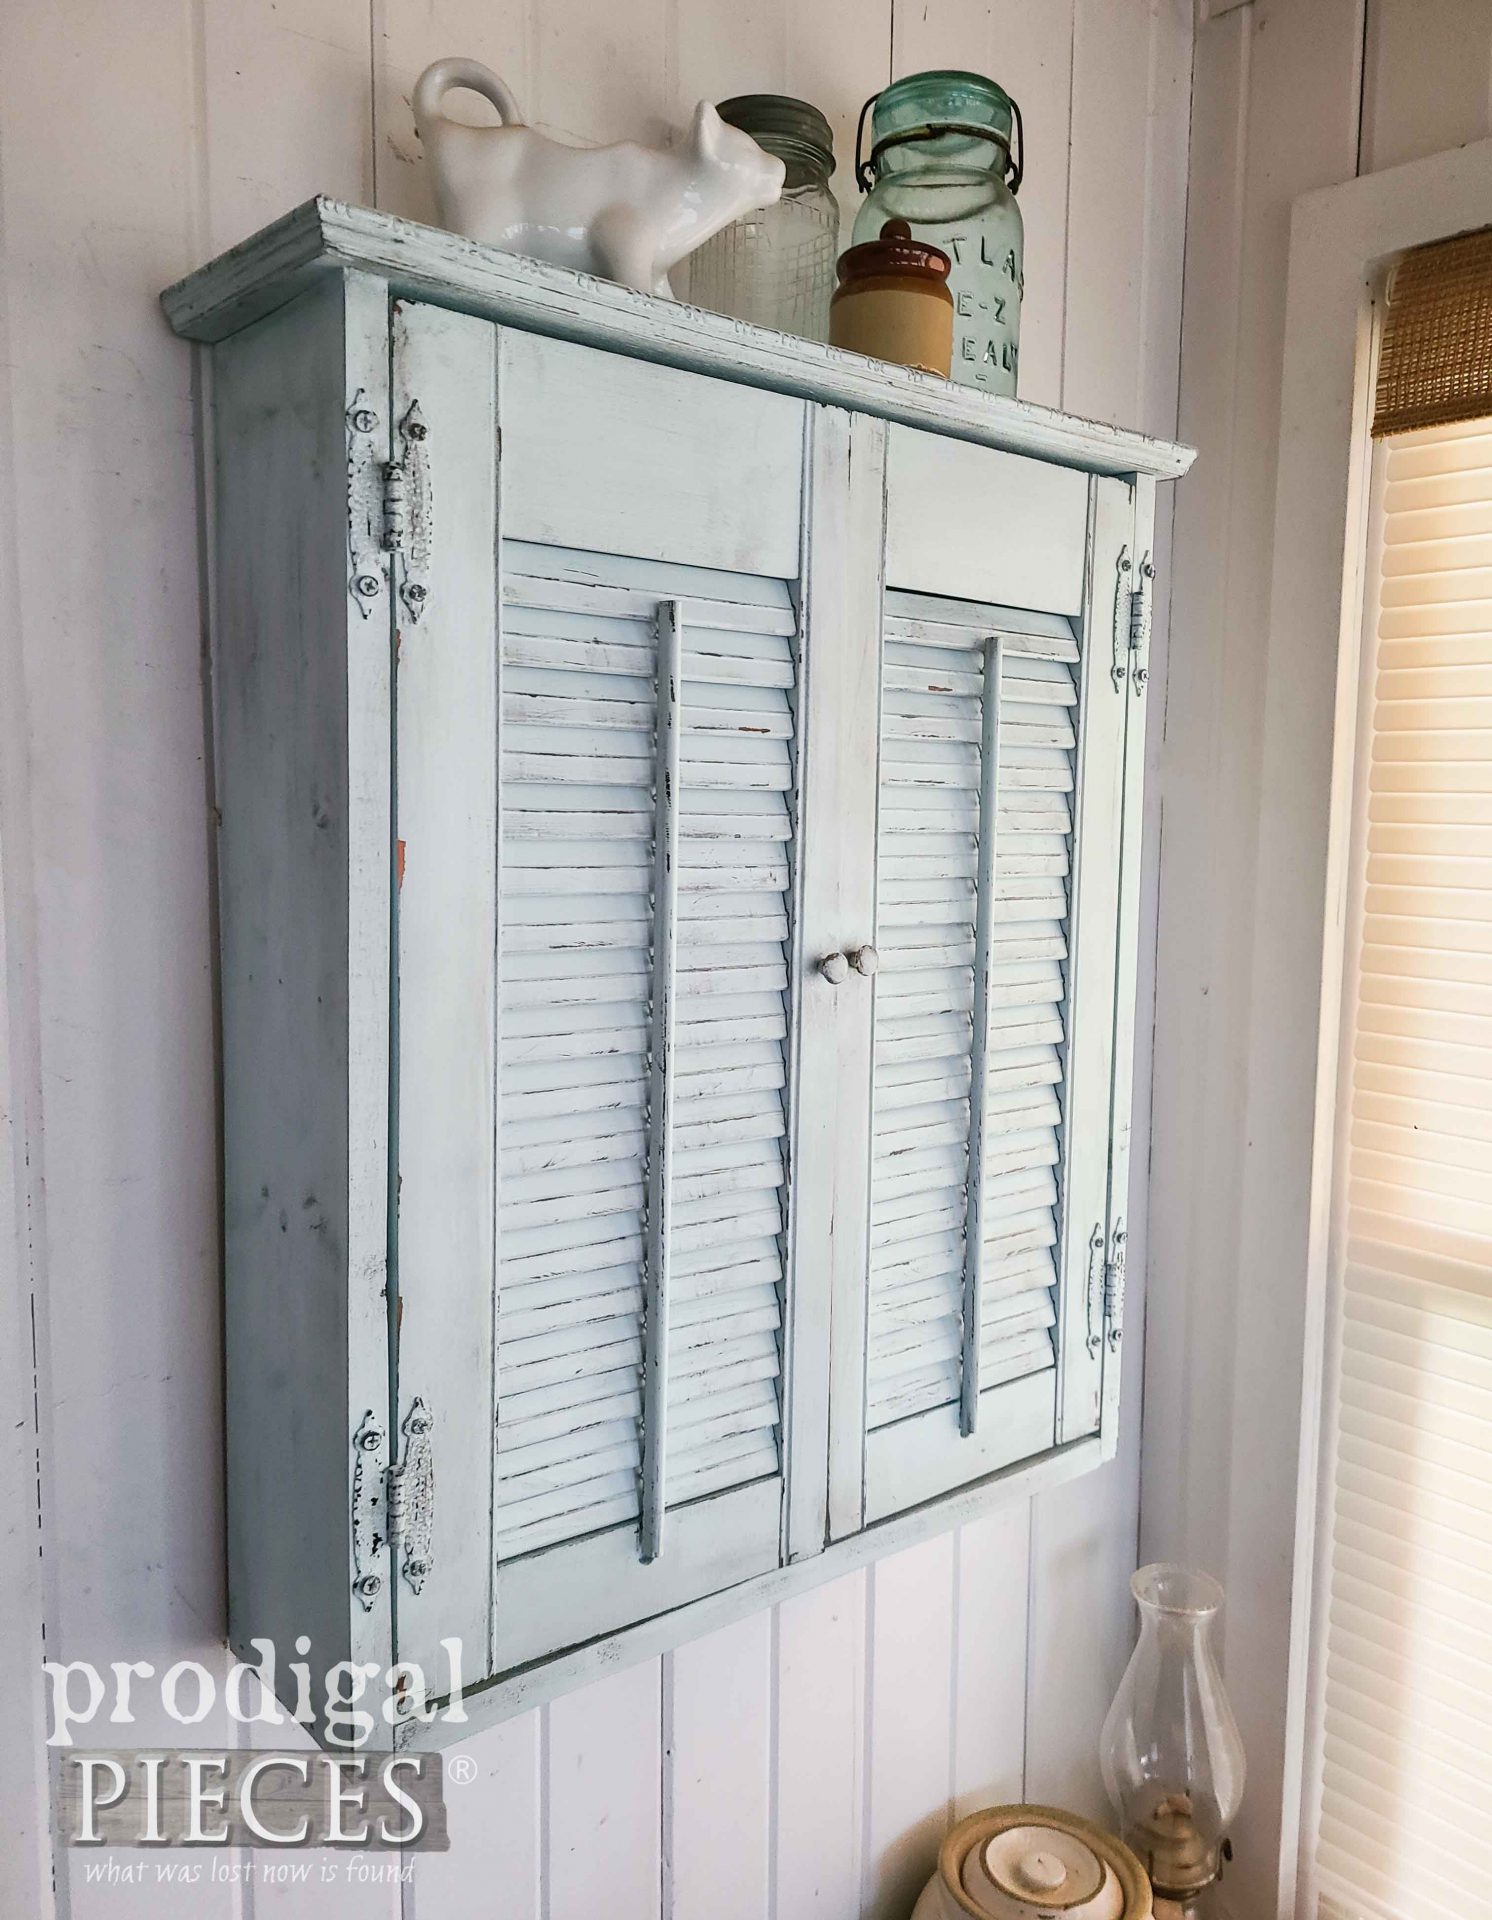 Handmade Upcycled Shutters Wall Cabinet in Aqua Blue by Larissa of Prodigal Pieces | prodigalpieces.com #prodigalpieces #diy #woodworking #home #diy